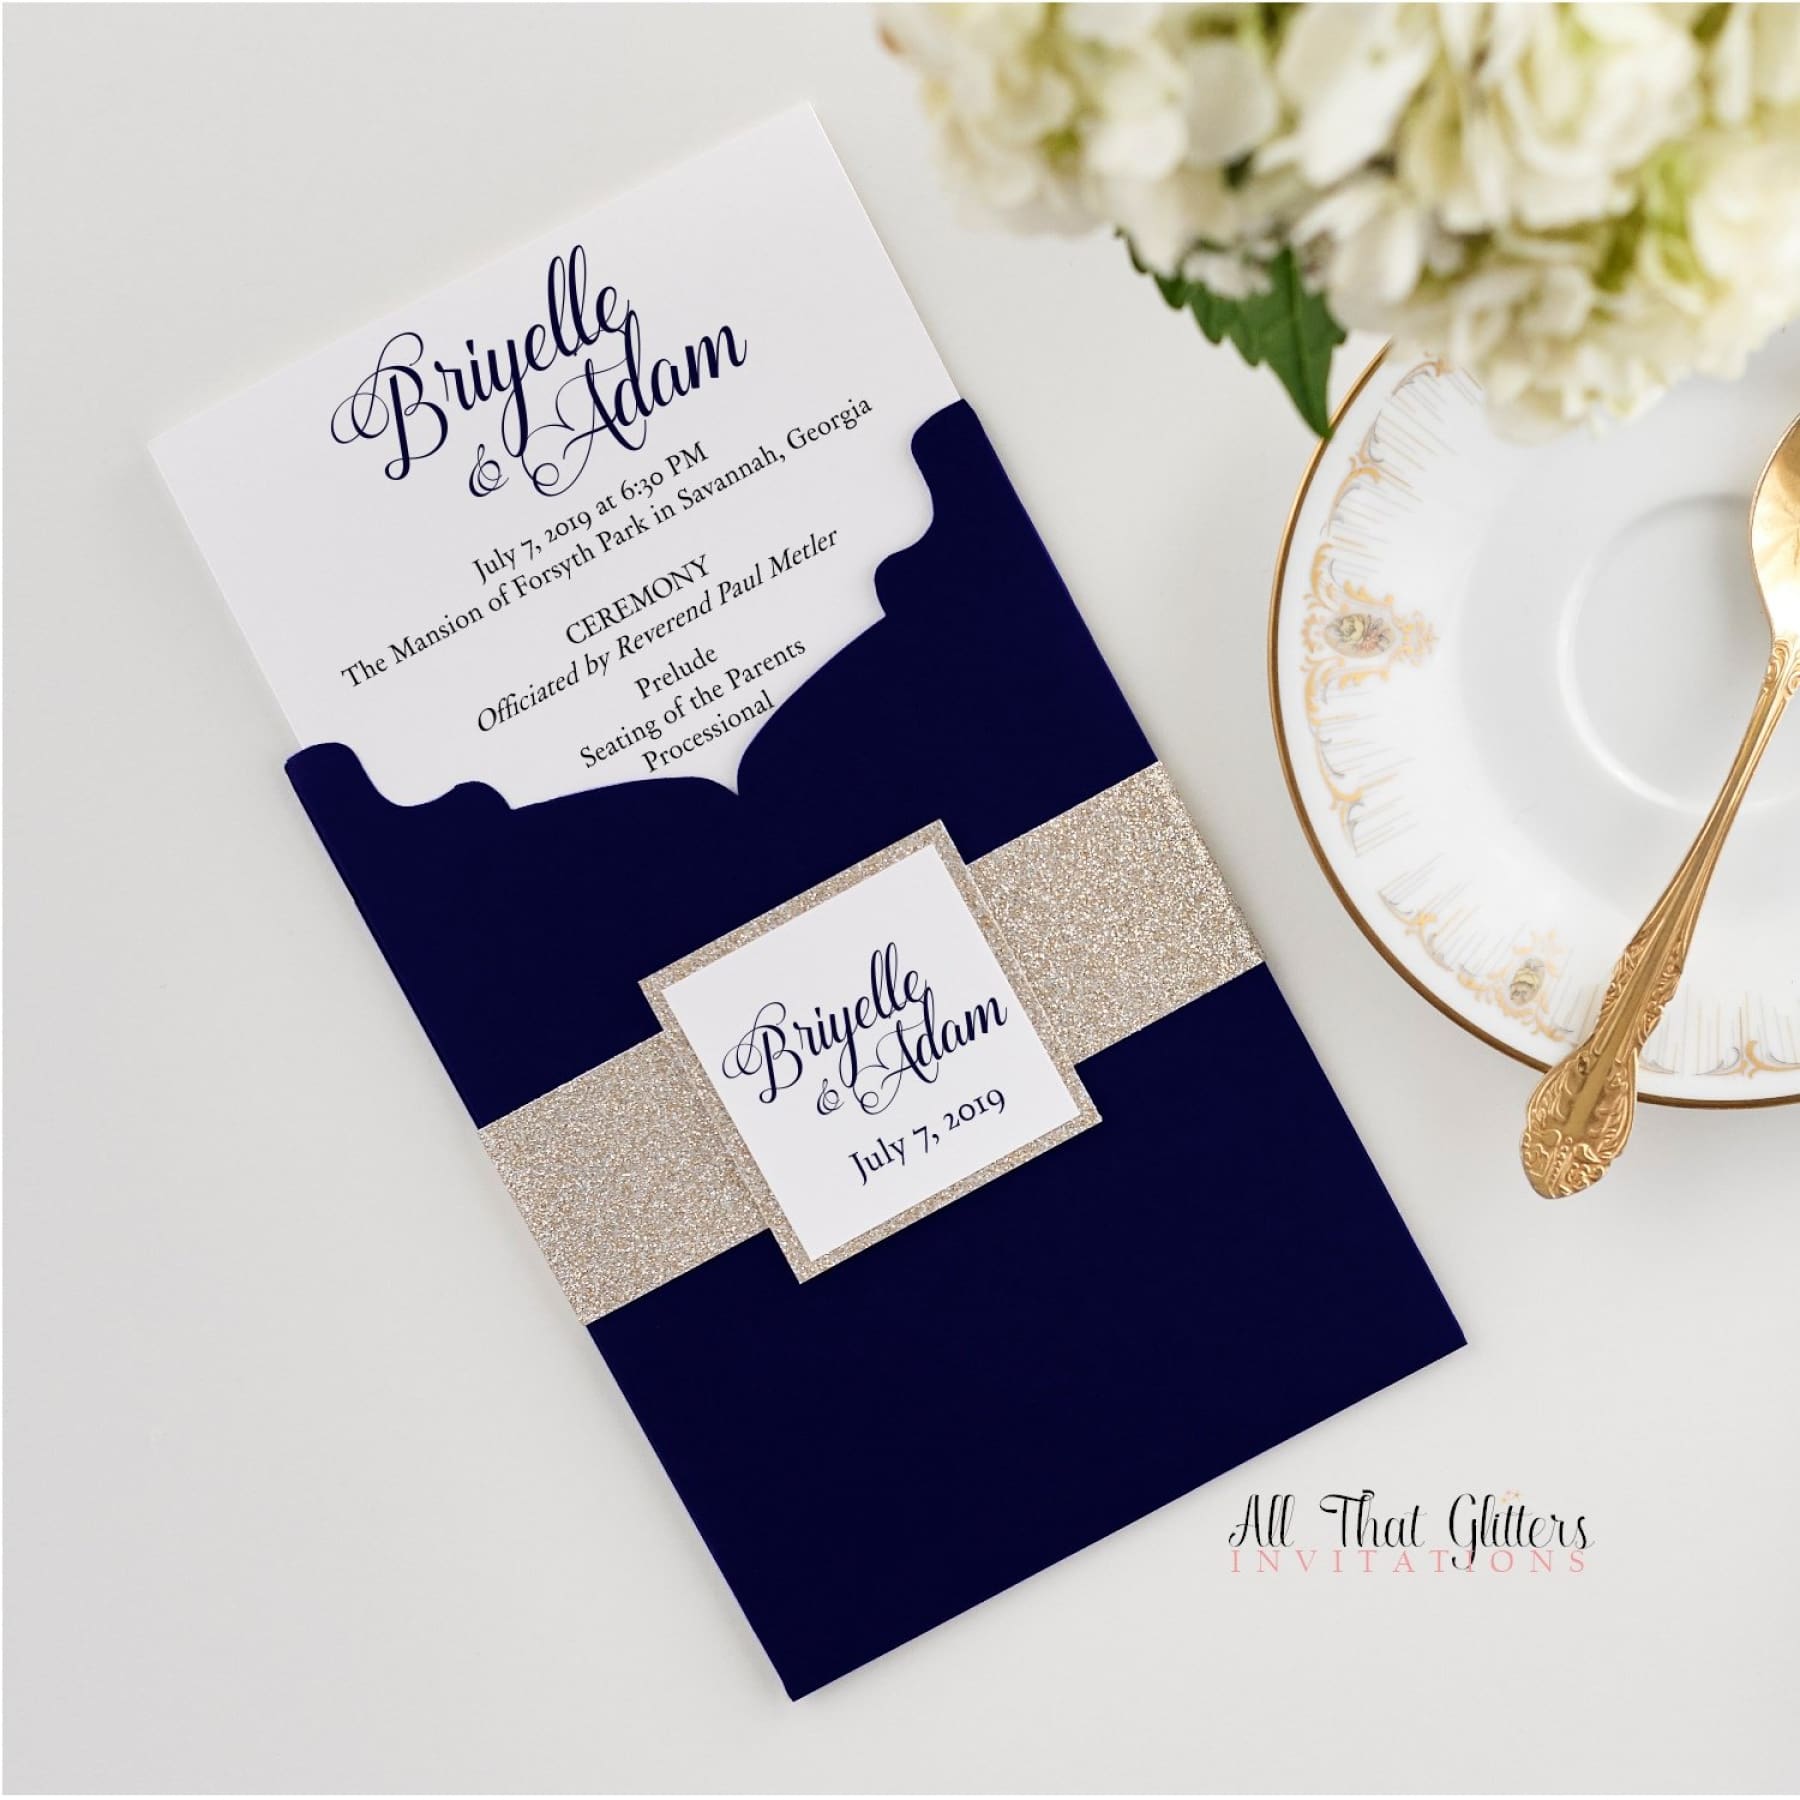 Ceremony Program, Bi-Fold Booklet with Pocket - All That Glitters Invitations